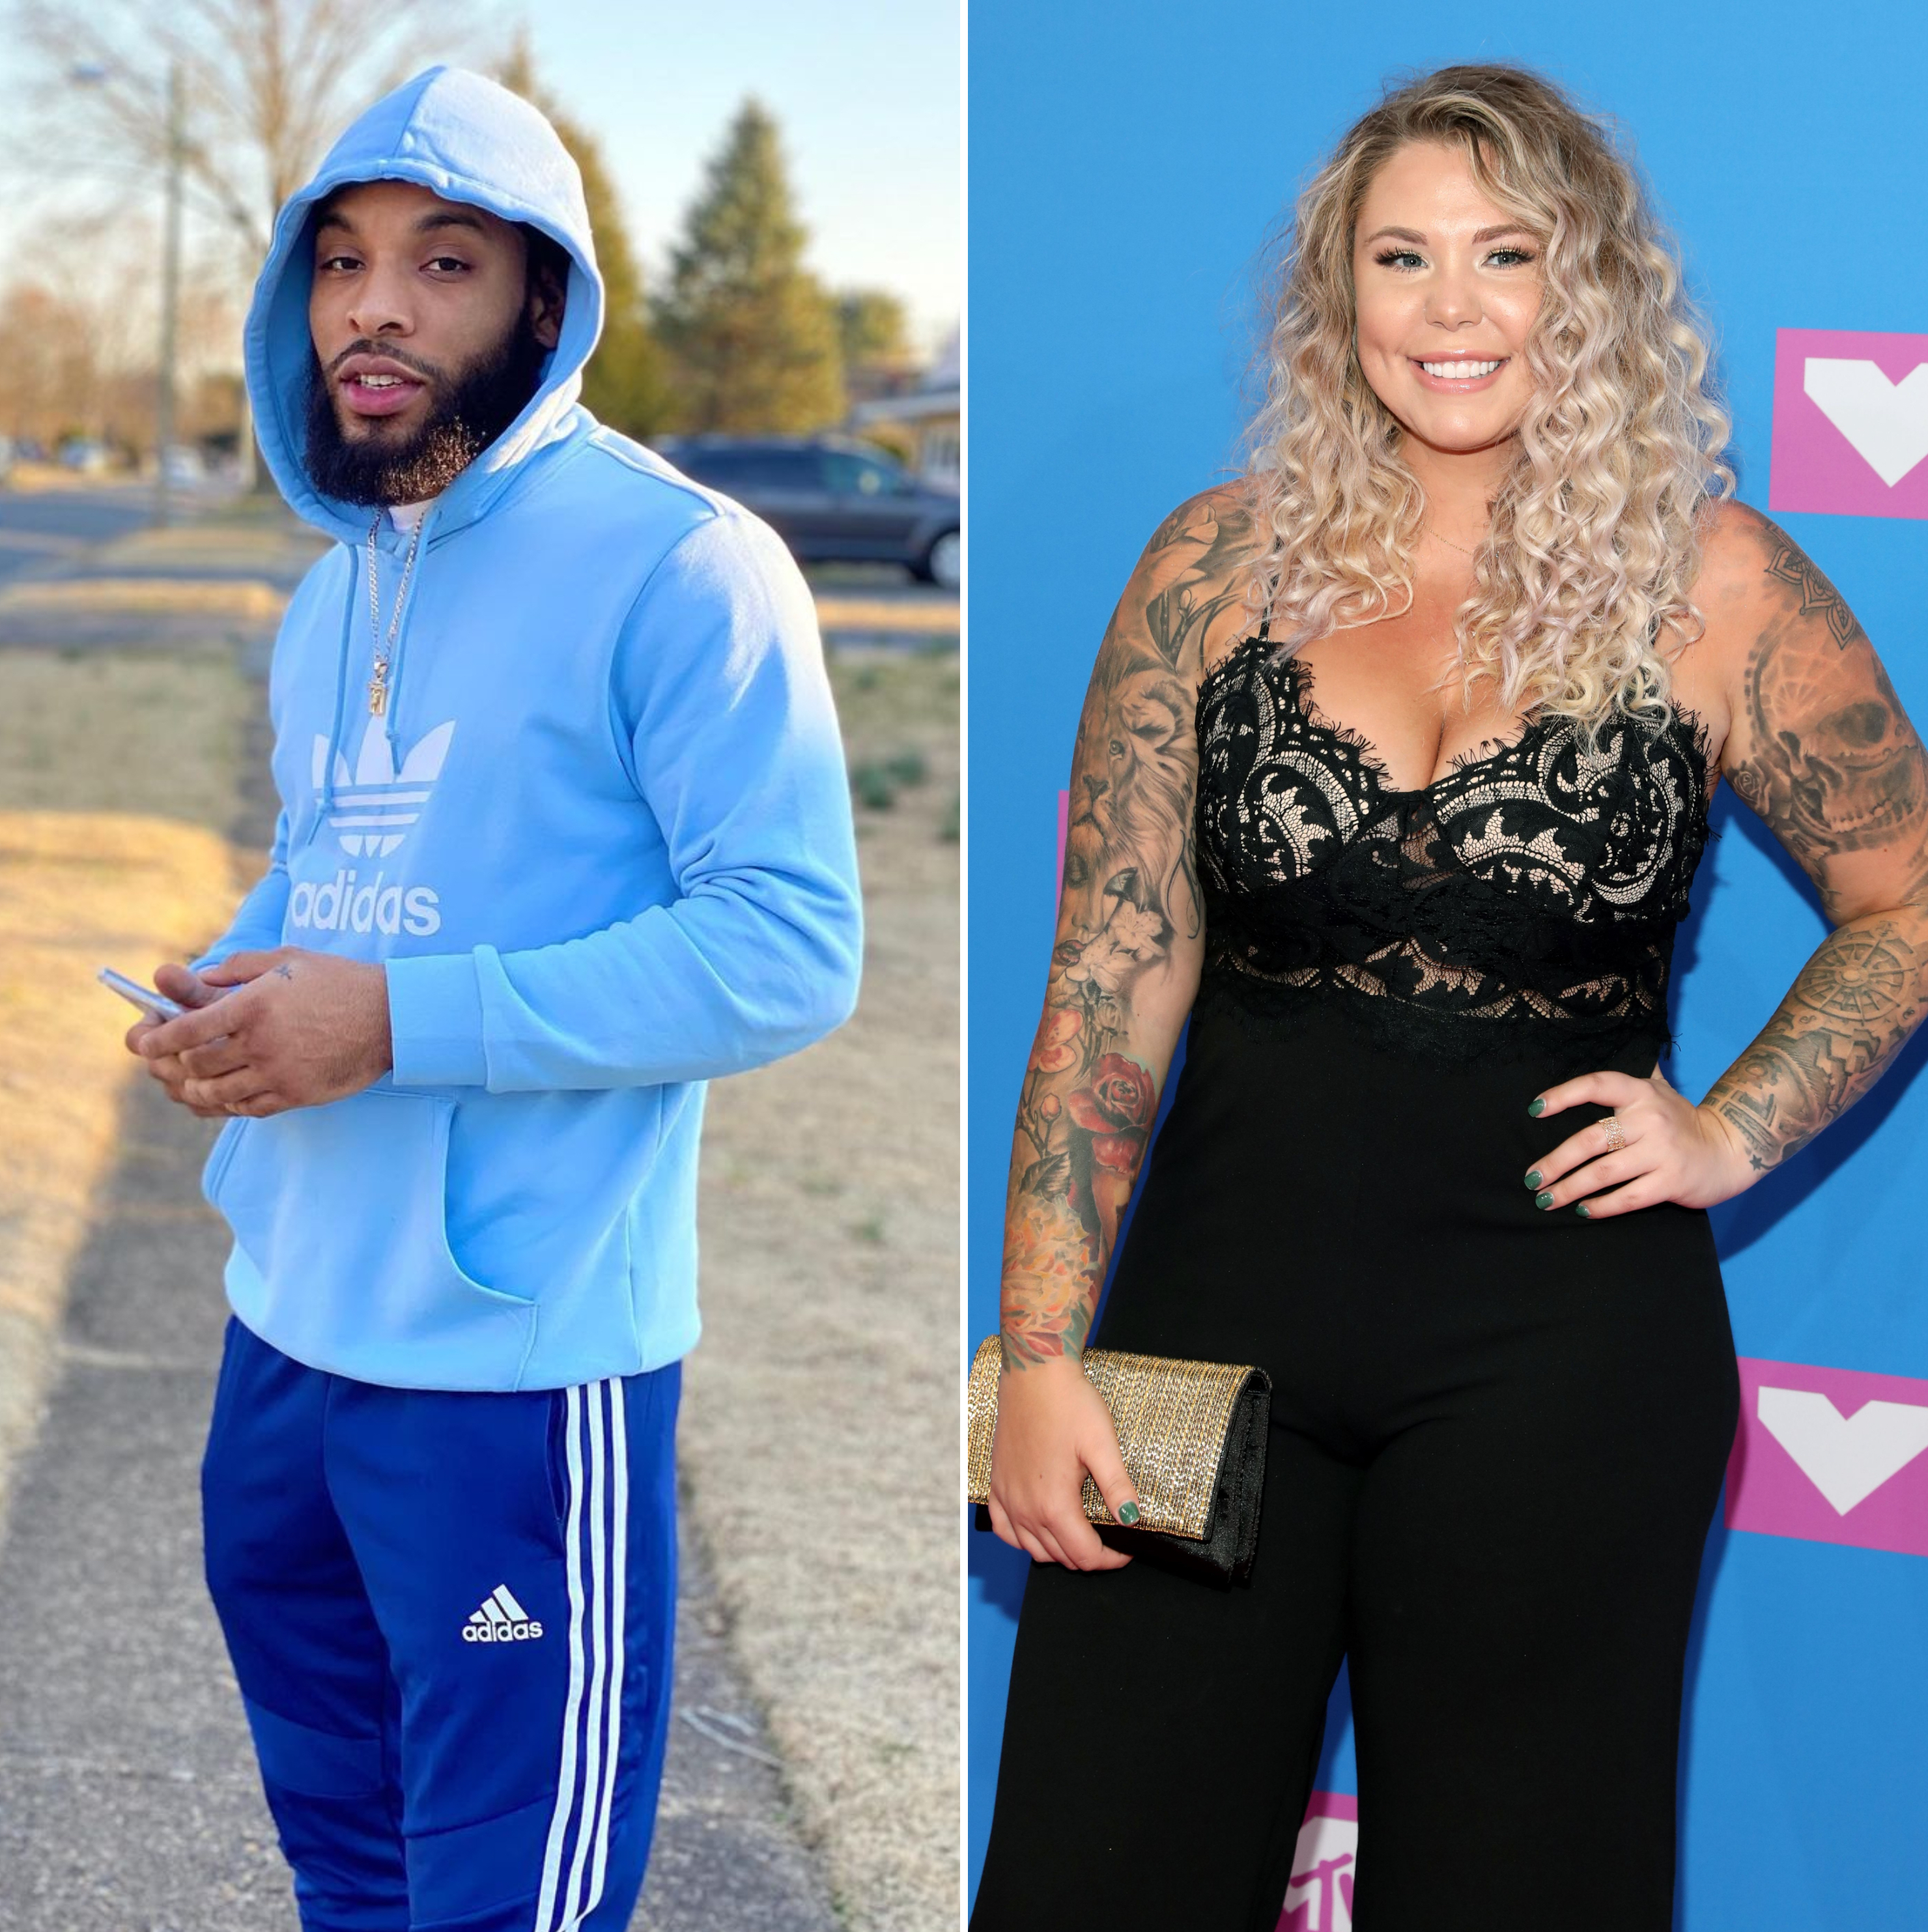 Chris Lopez Says He Had Sex With Kailyn Lowry at Doctors Office pic